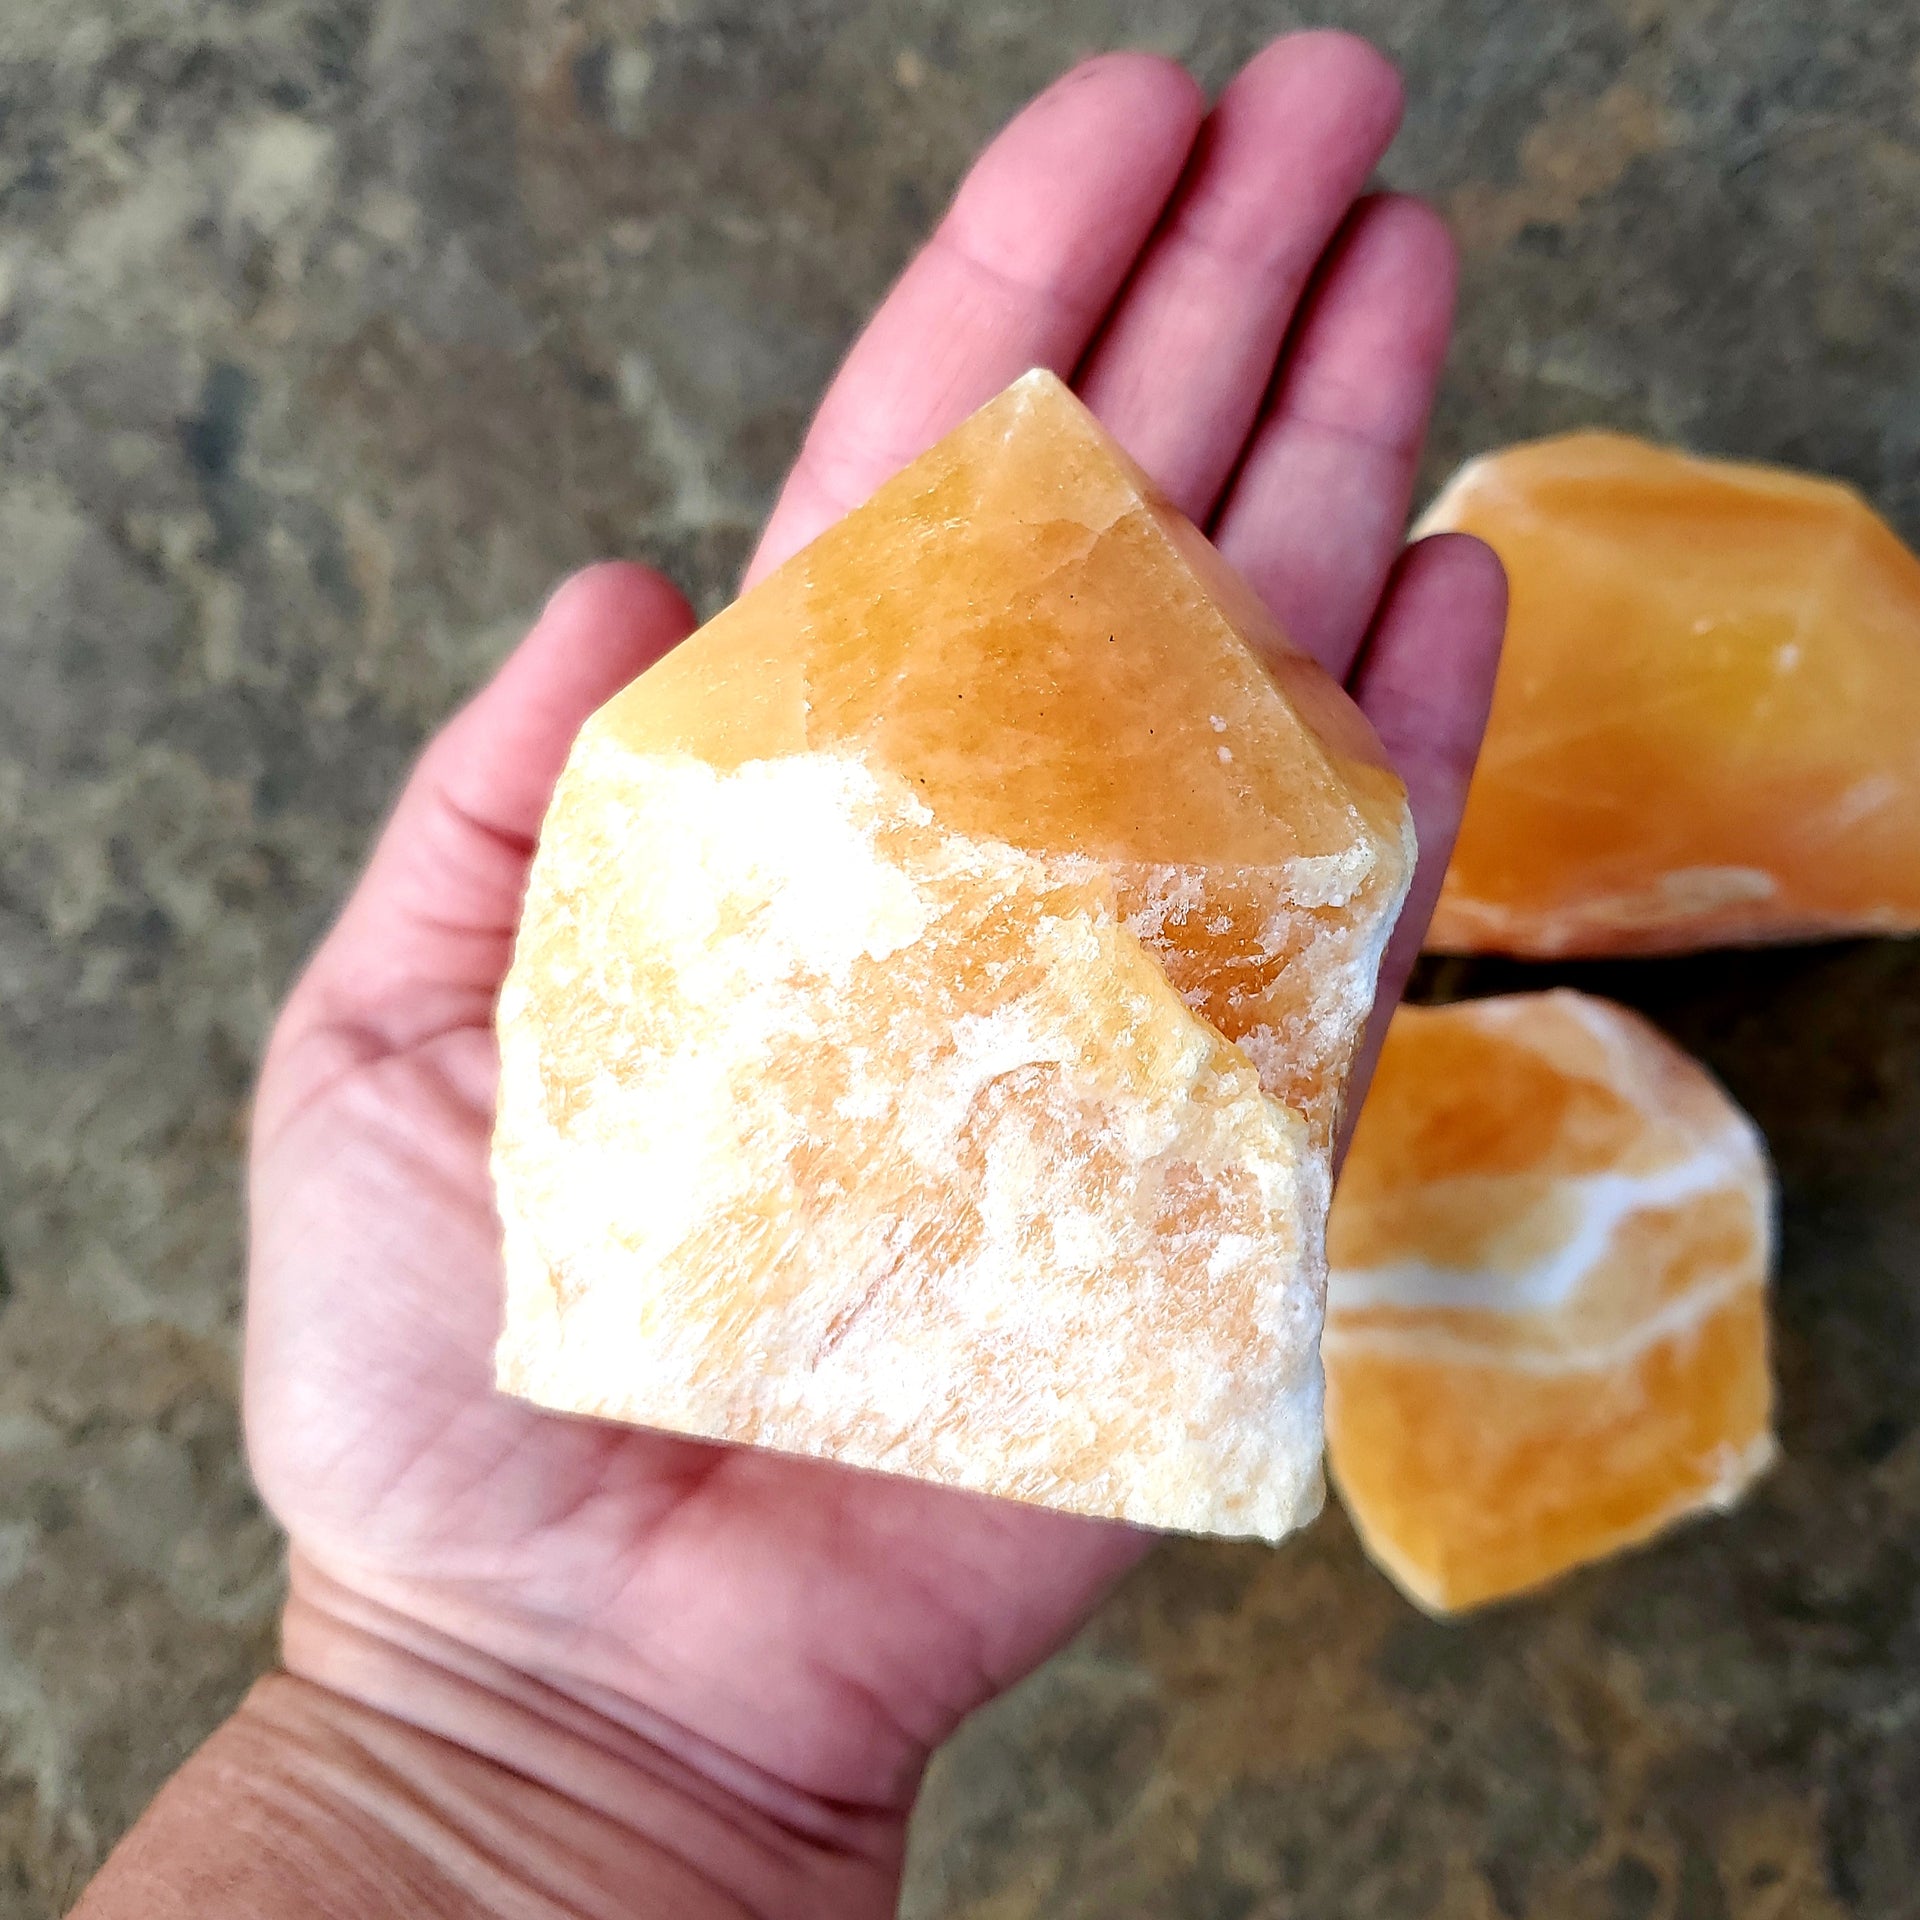 ORANGE CALCITE TOP POLISHED POINT